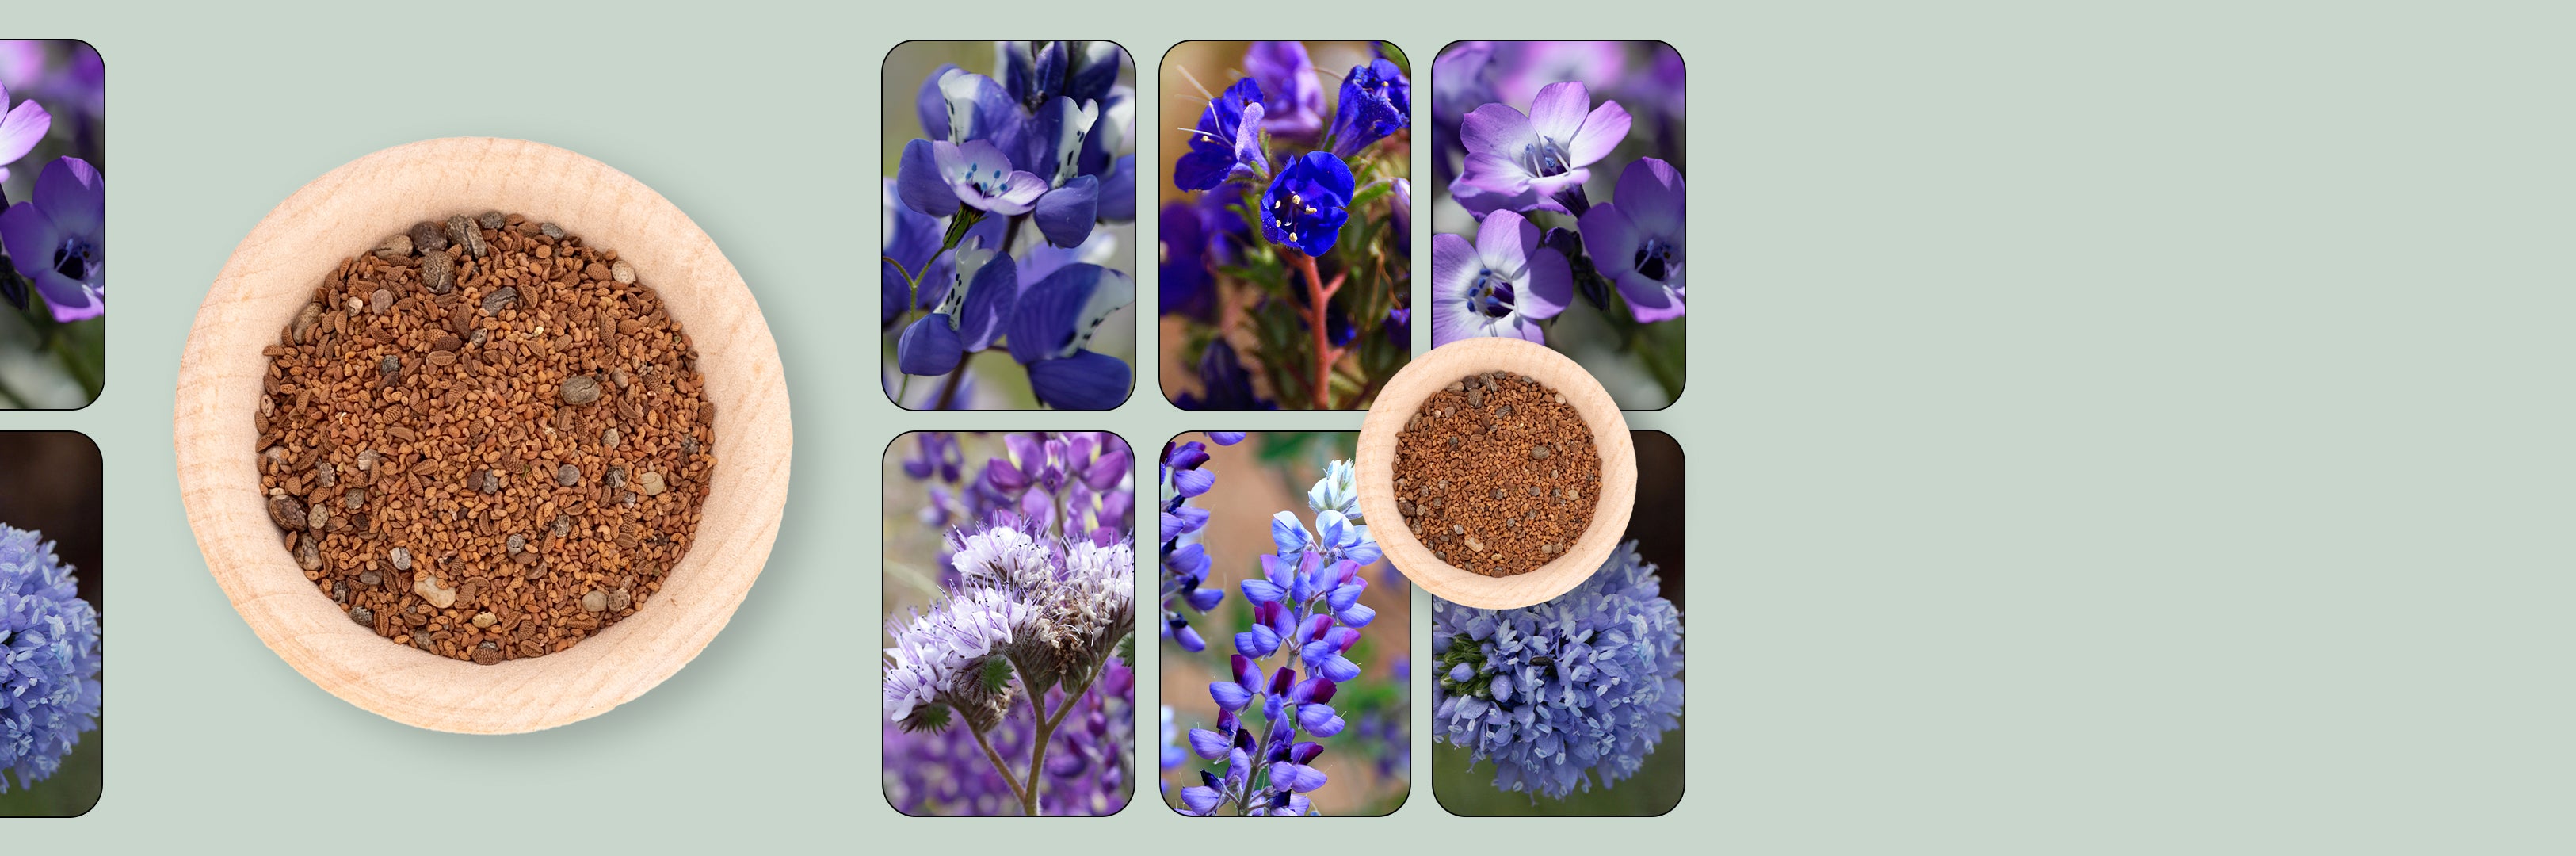 Image_with_text-Blue-Lavender-3.jpg